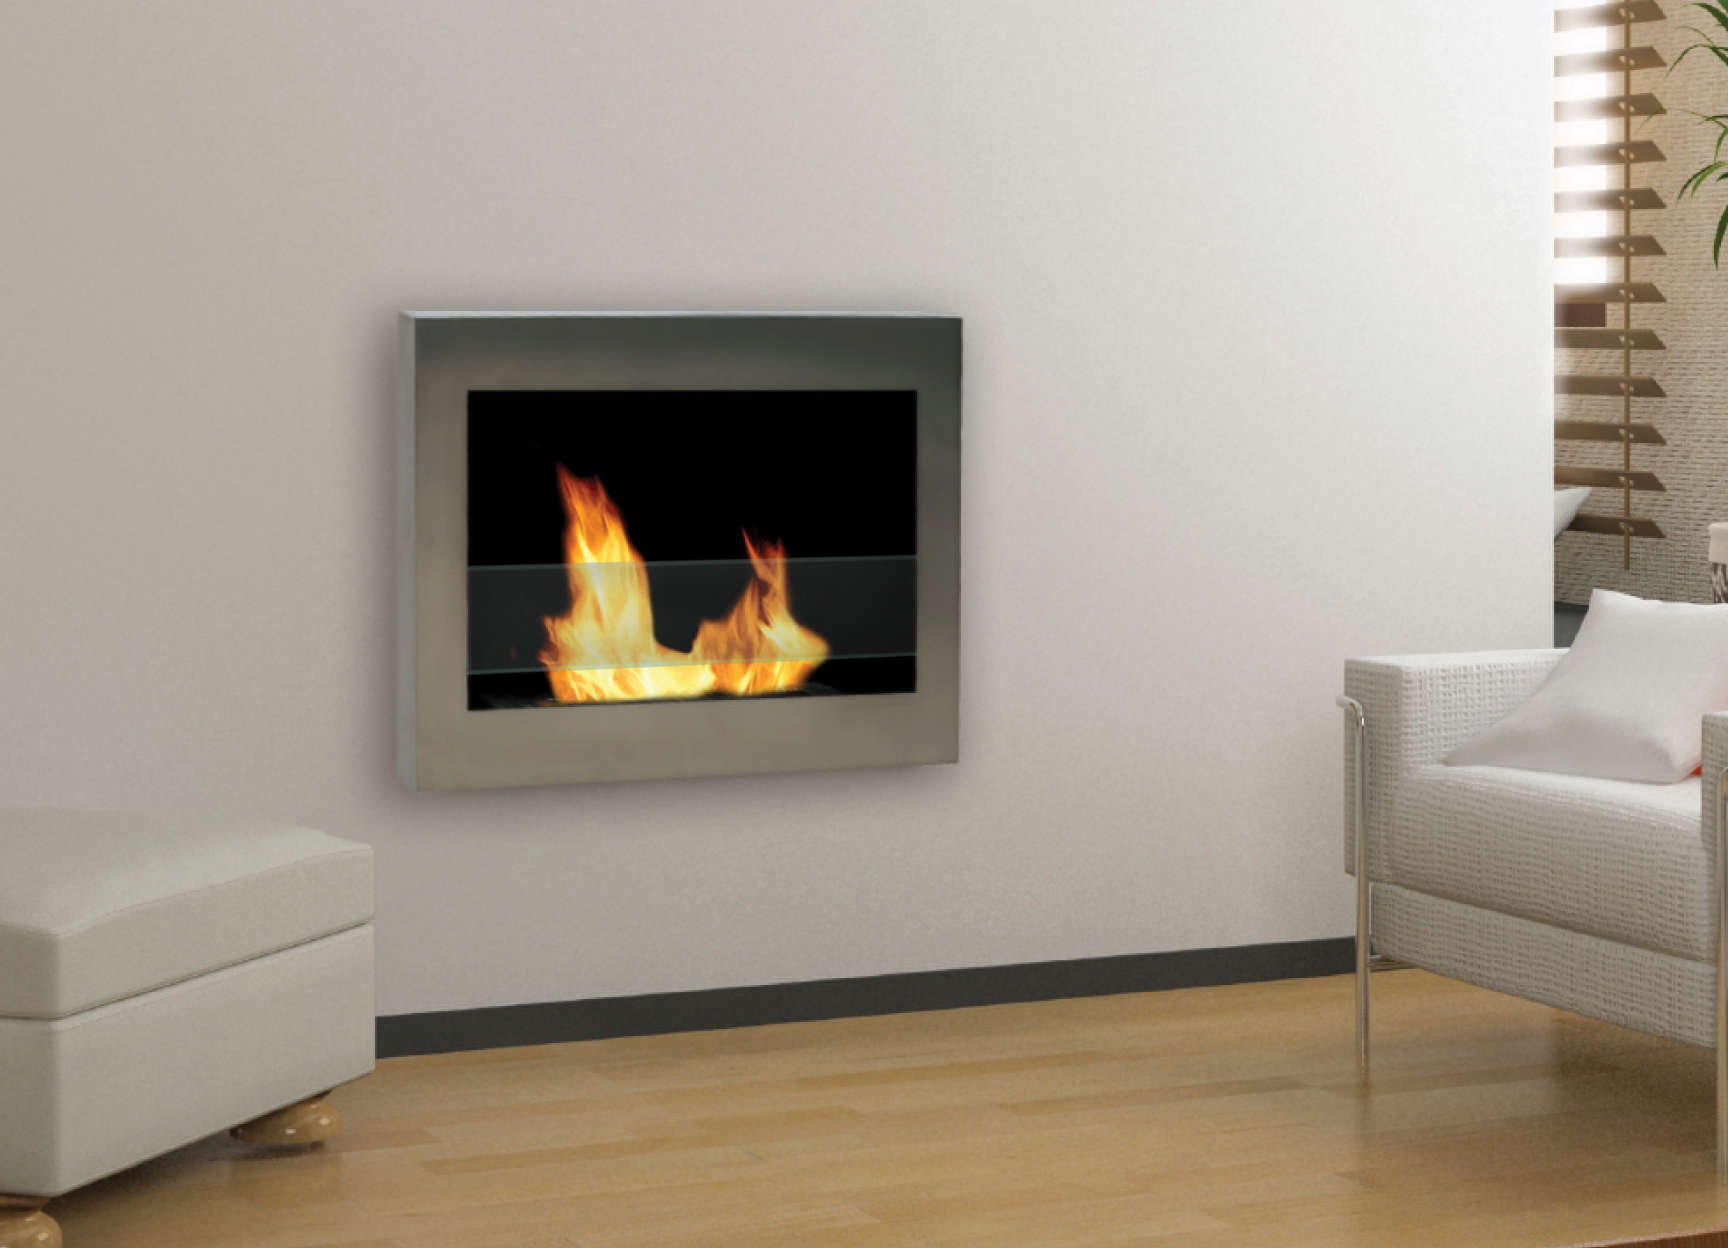 Picture of Anywhere Fireplace 90299 SoHo Indoor Wall Mount Stainless Steel Fireplace